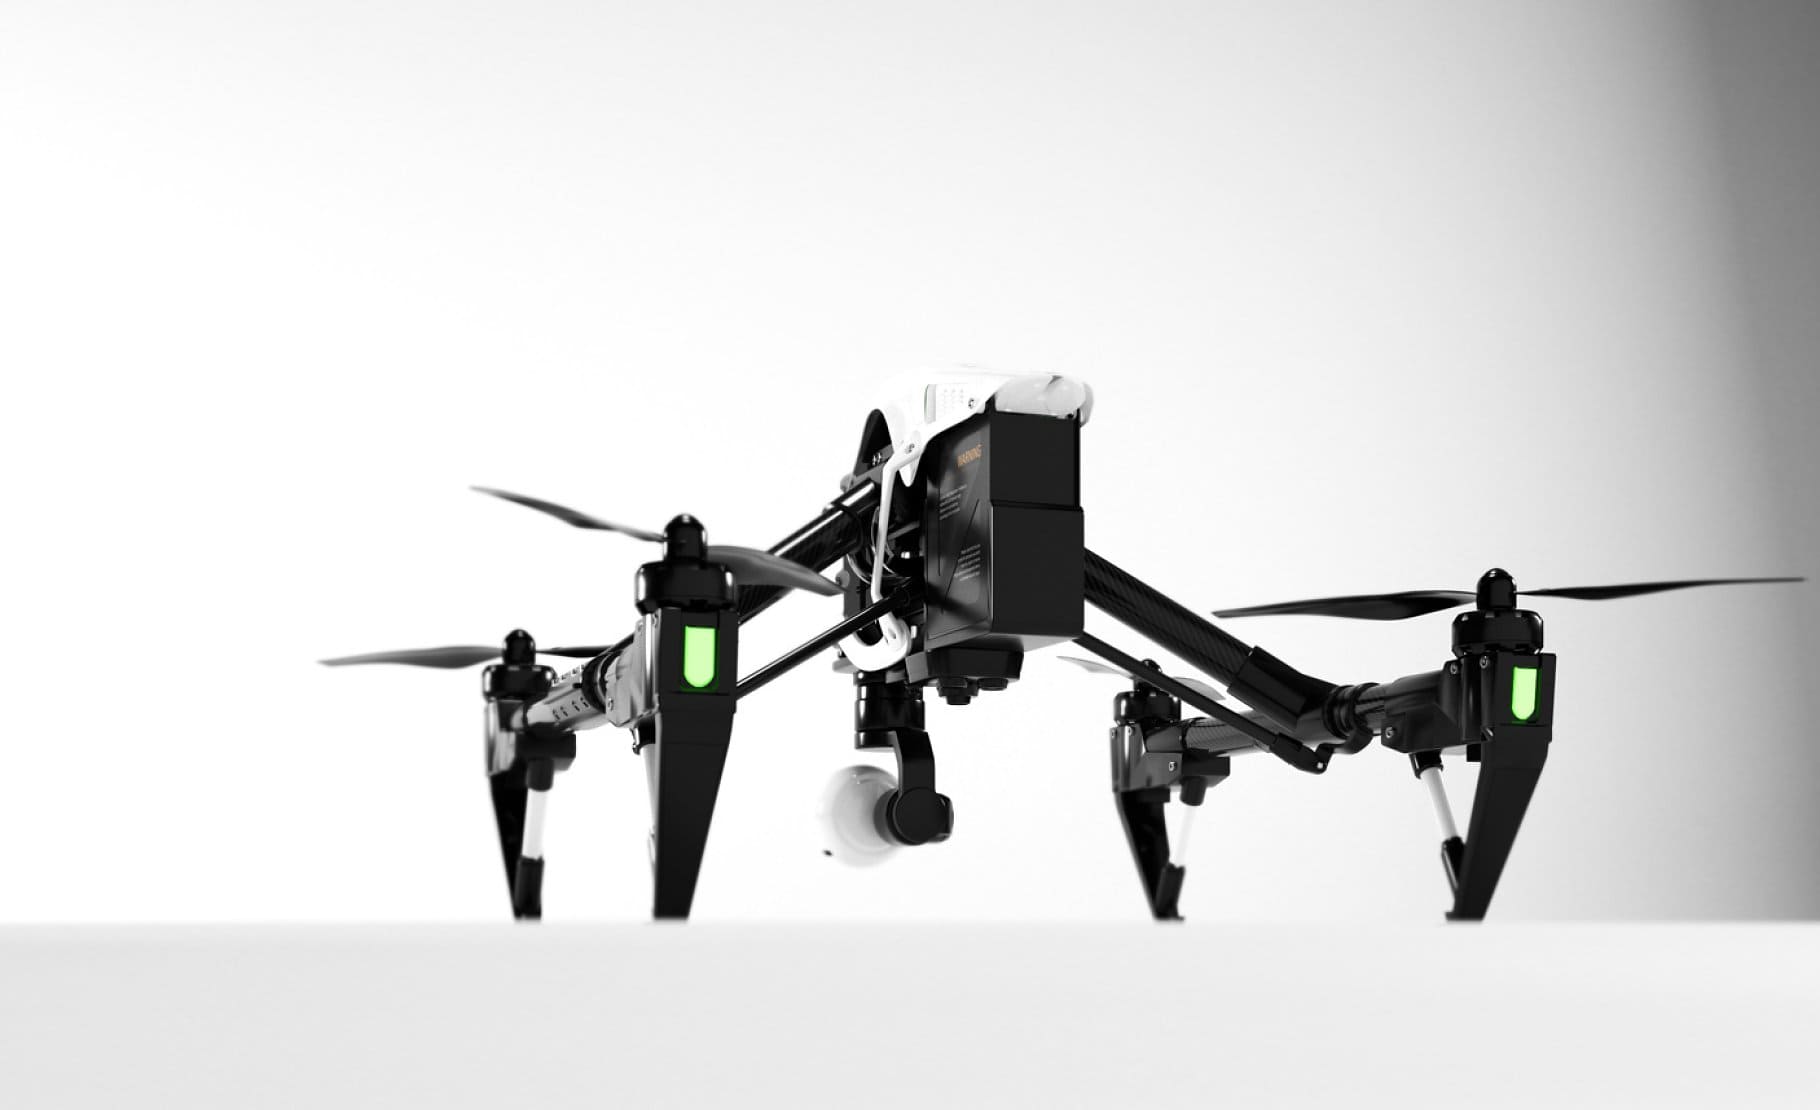 Black quadcopter with green lights that indicate the operation of the quadcopter.